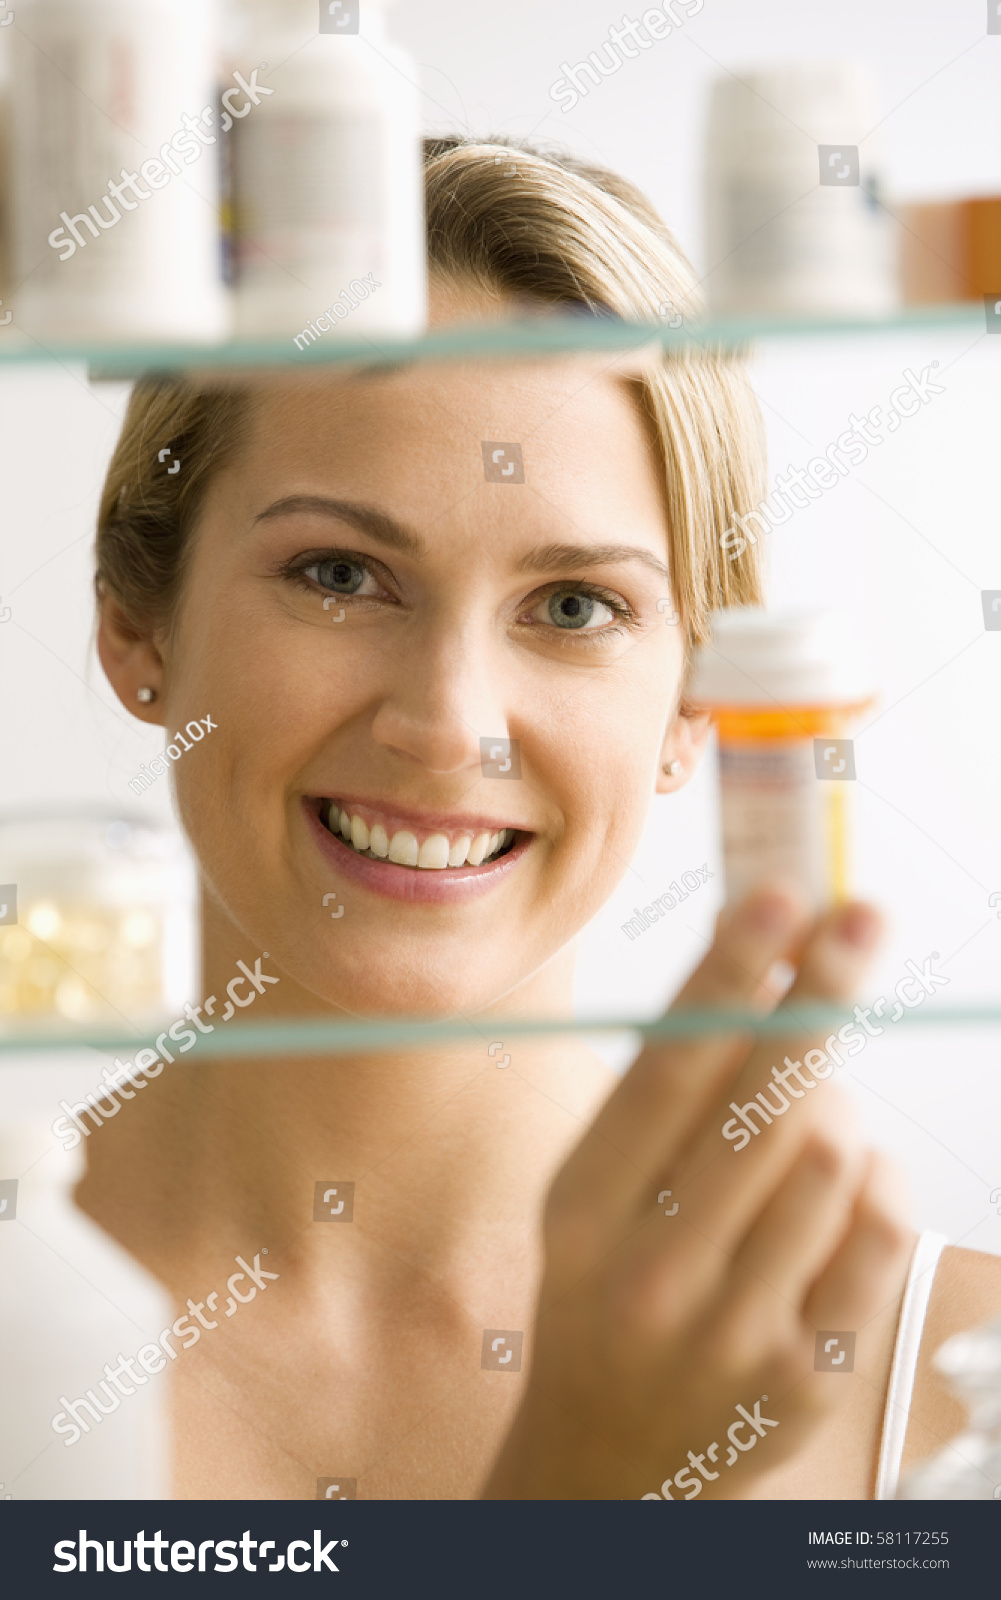 Young Woman Looks Through Medicine Cabinet Stockfoto Jetzt